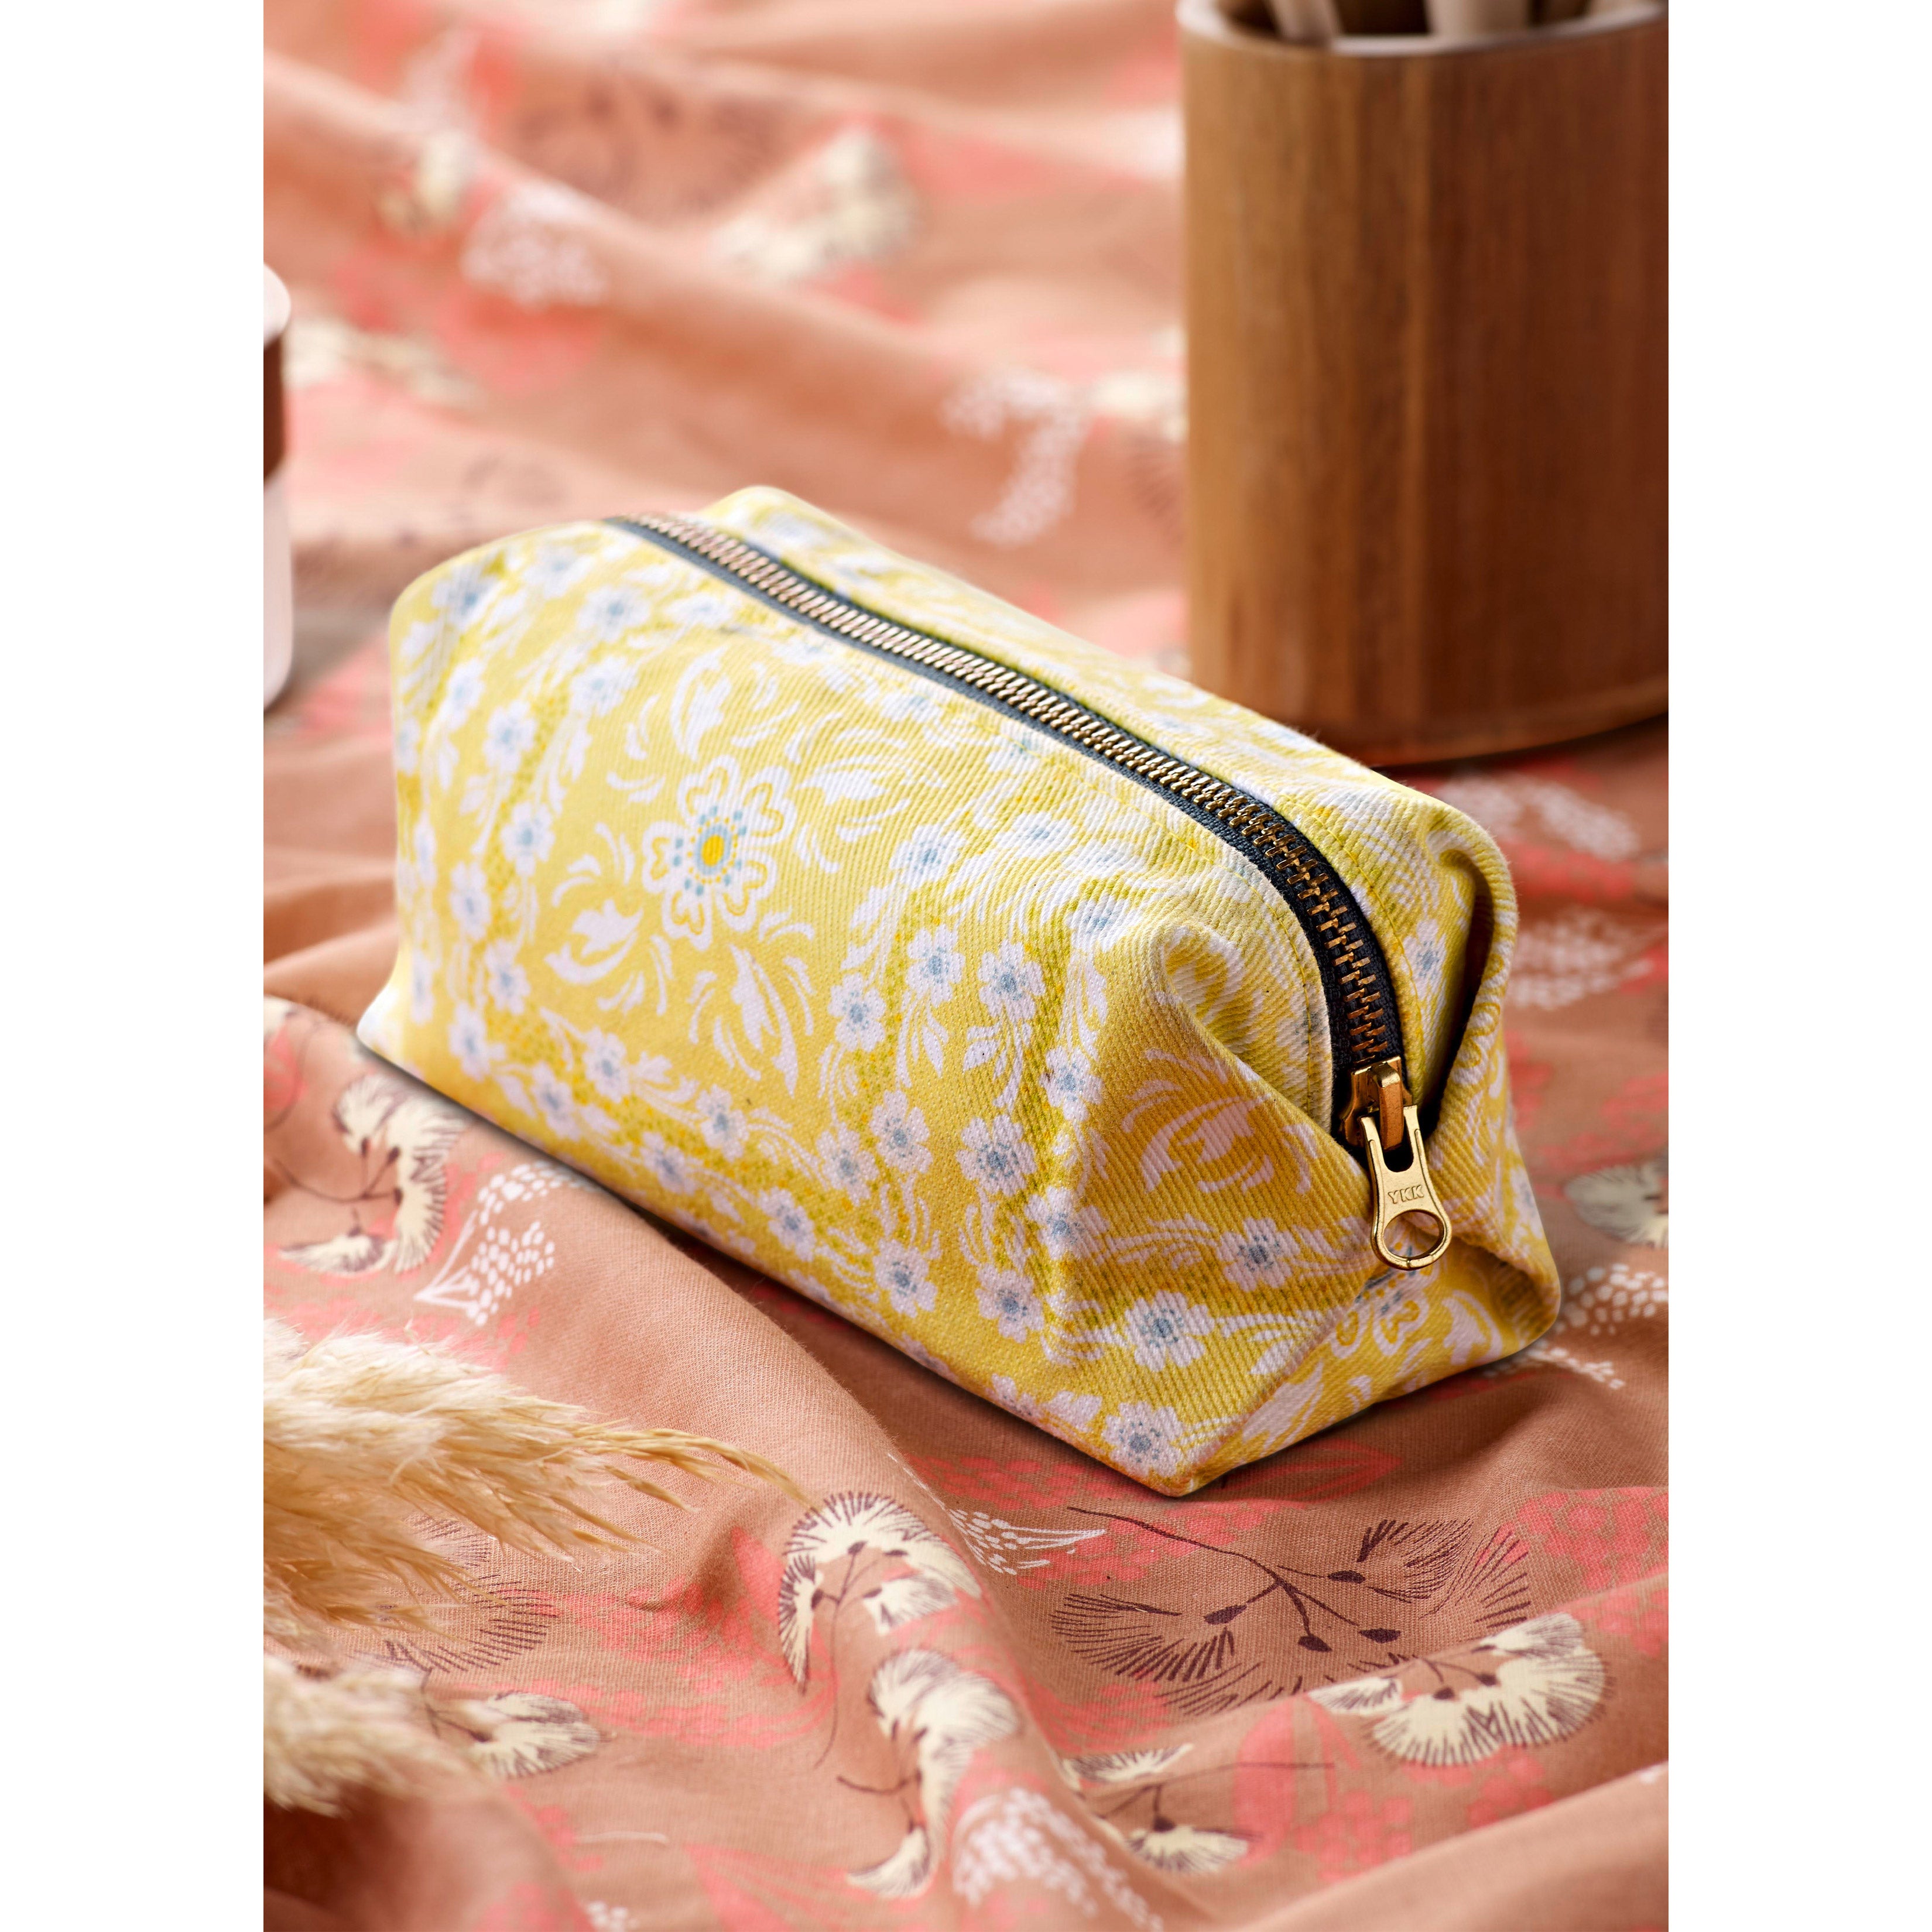 Burda Sewing Pattern 5993 Pencil Case, Pochette, Clutch from Jaycotts Sewing Supplies